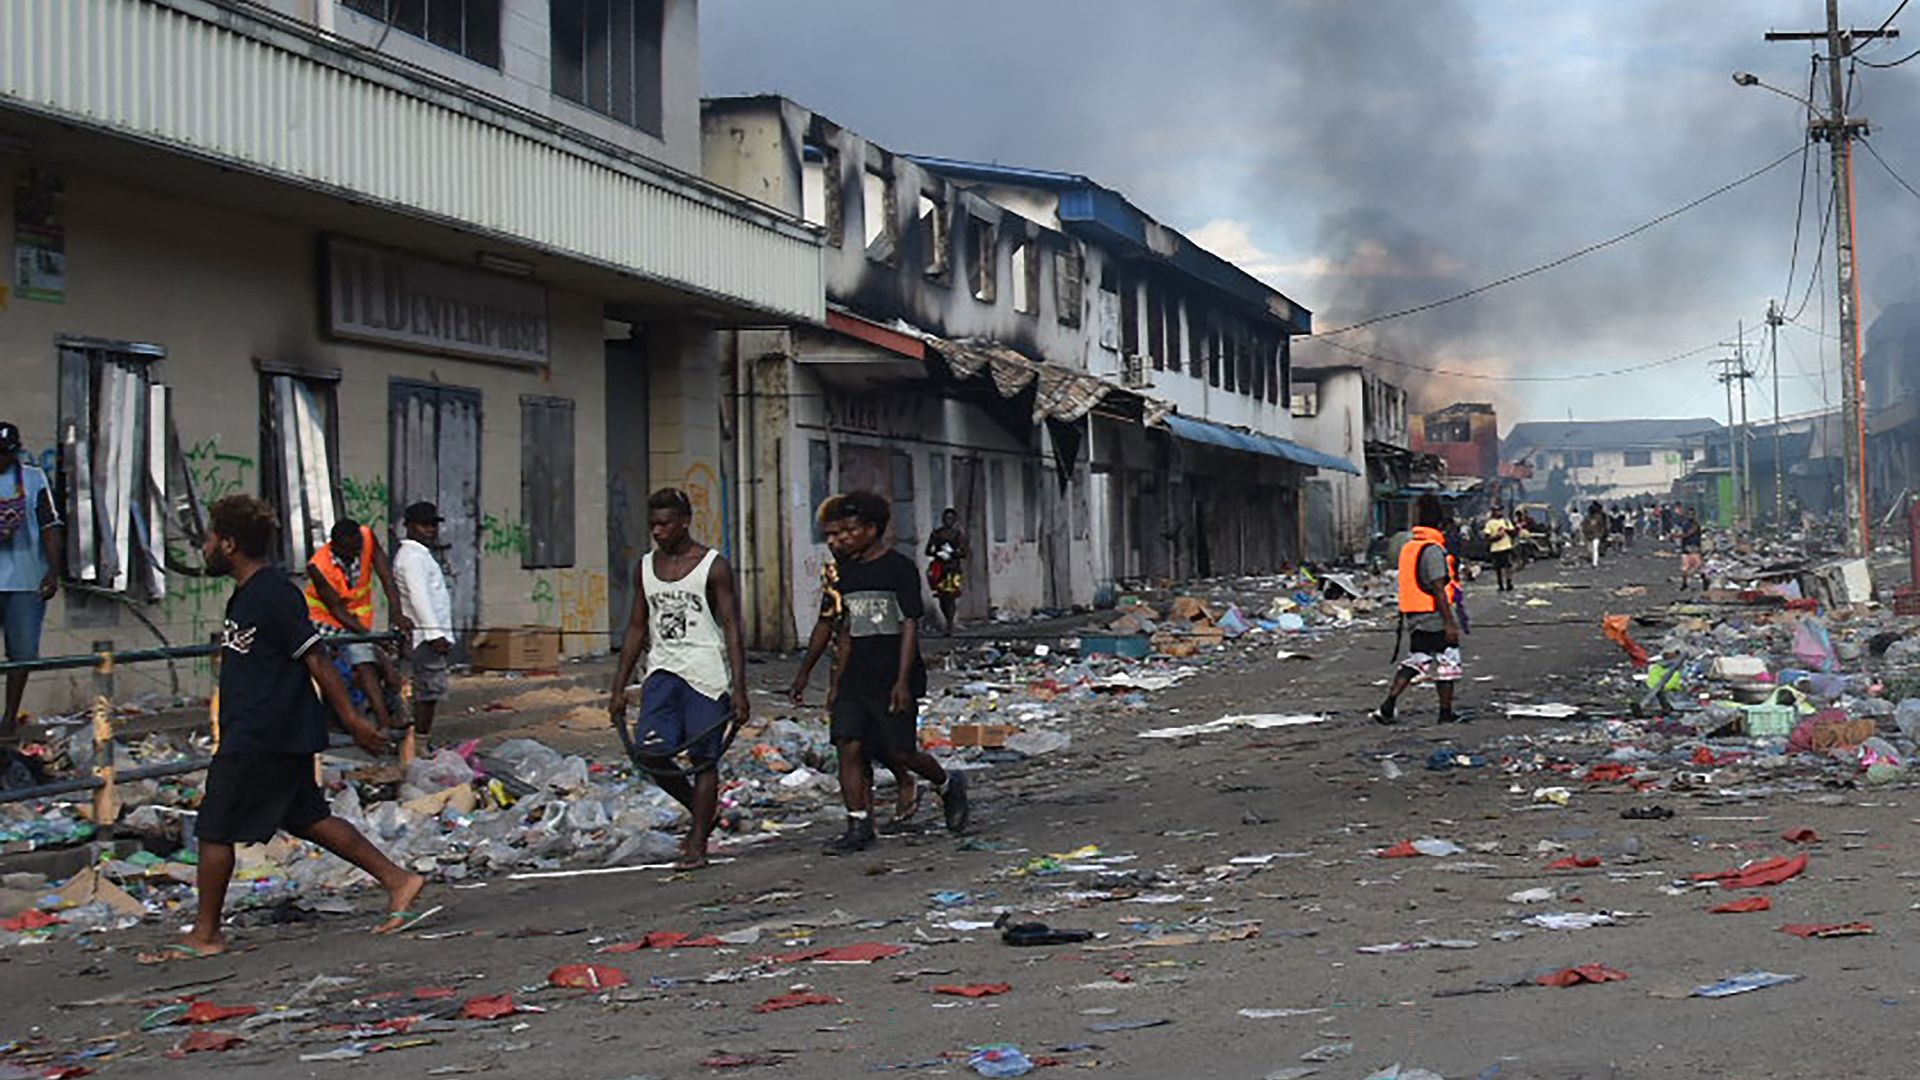 People walk through the Chinatown district of Honiara on the Solomon Islands on November 26, 2021, after a third day of violence